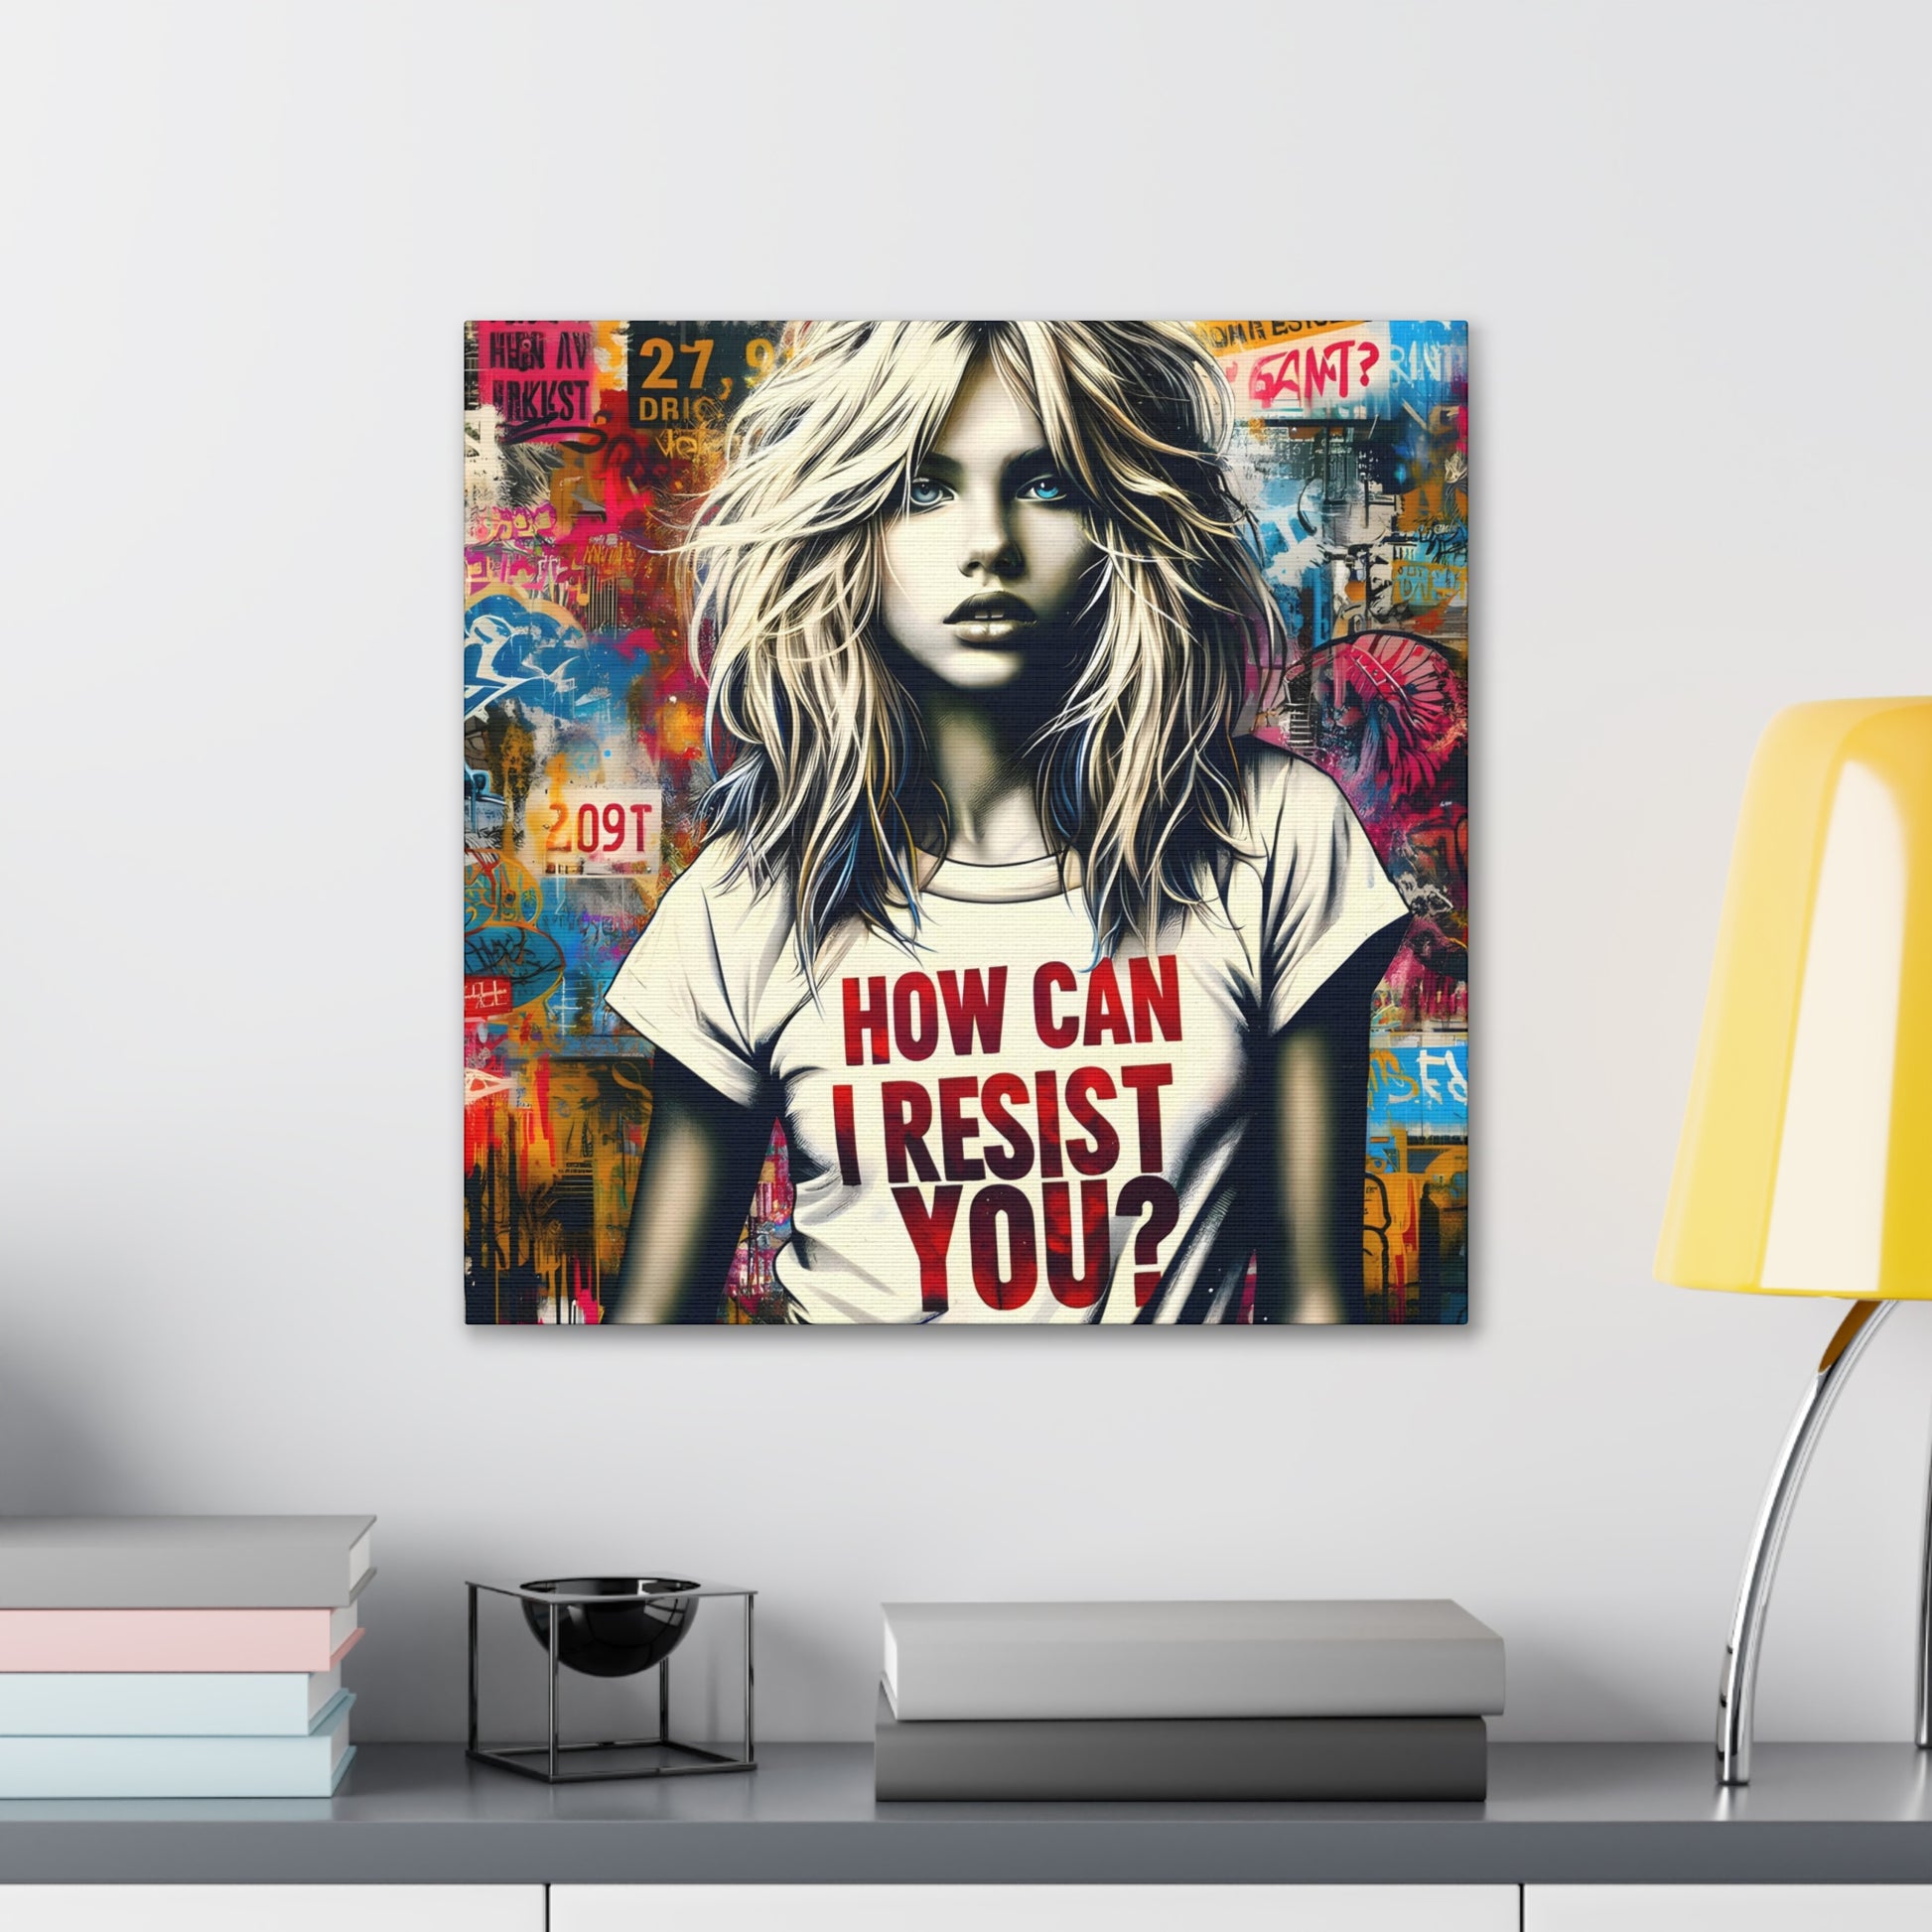 in situ with desk AI-generated art, 'Resist You? – An ABBA Echo,' with a modern Aphrodite in urban setting, her shirt reading 'HOW CAN I RESIST YOU?' amidst colorful graffiti, echoing ABBA's themes.